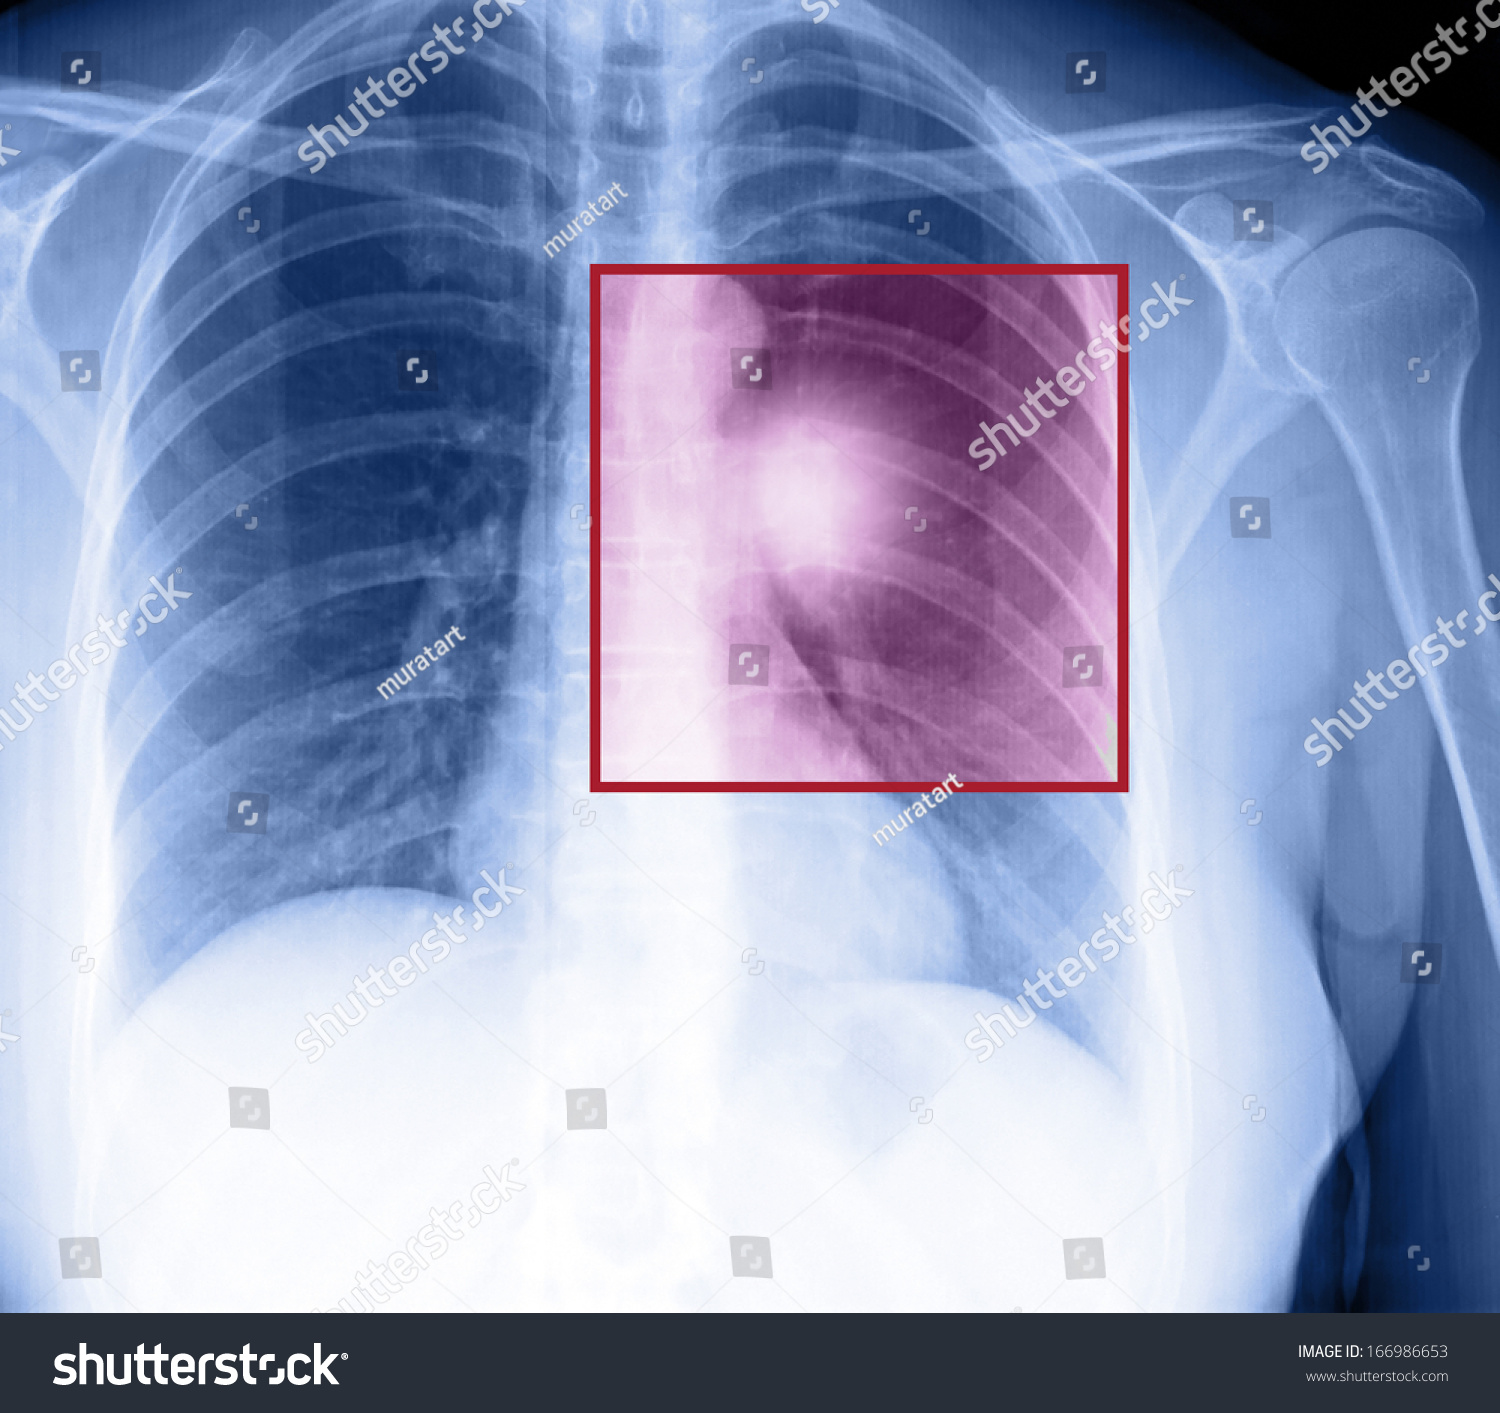 X-Ray Of Human Cancer Lungs Stock Photo 166986653 : Shutterstock